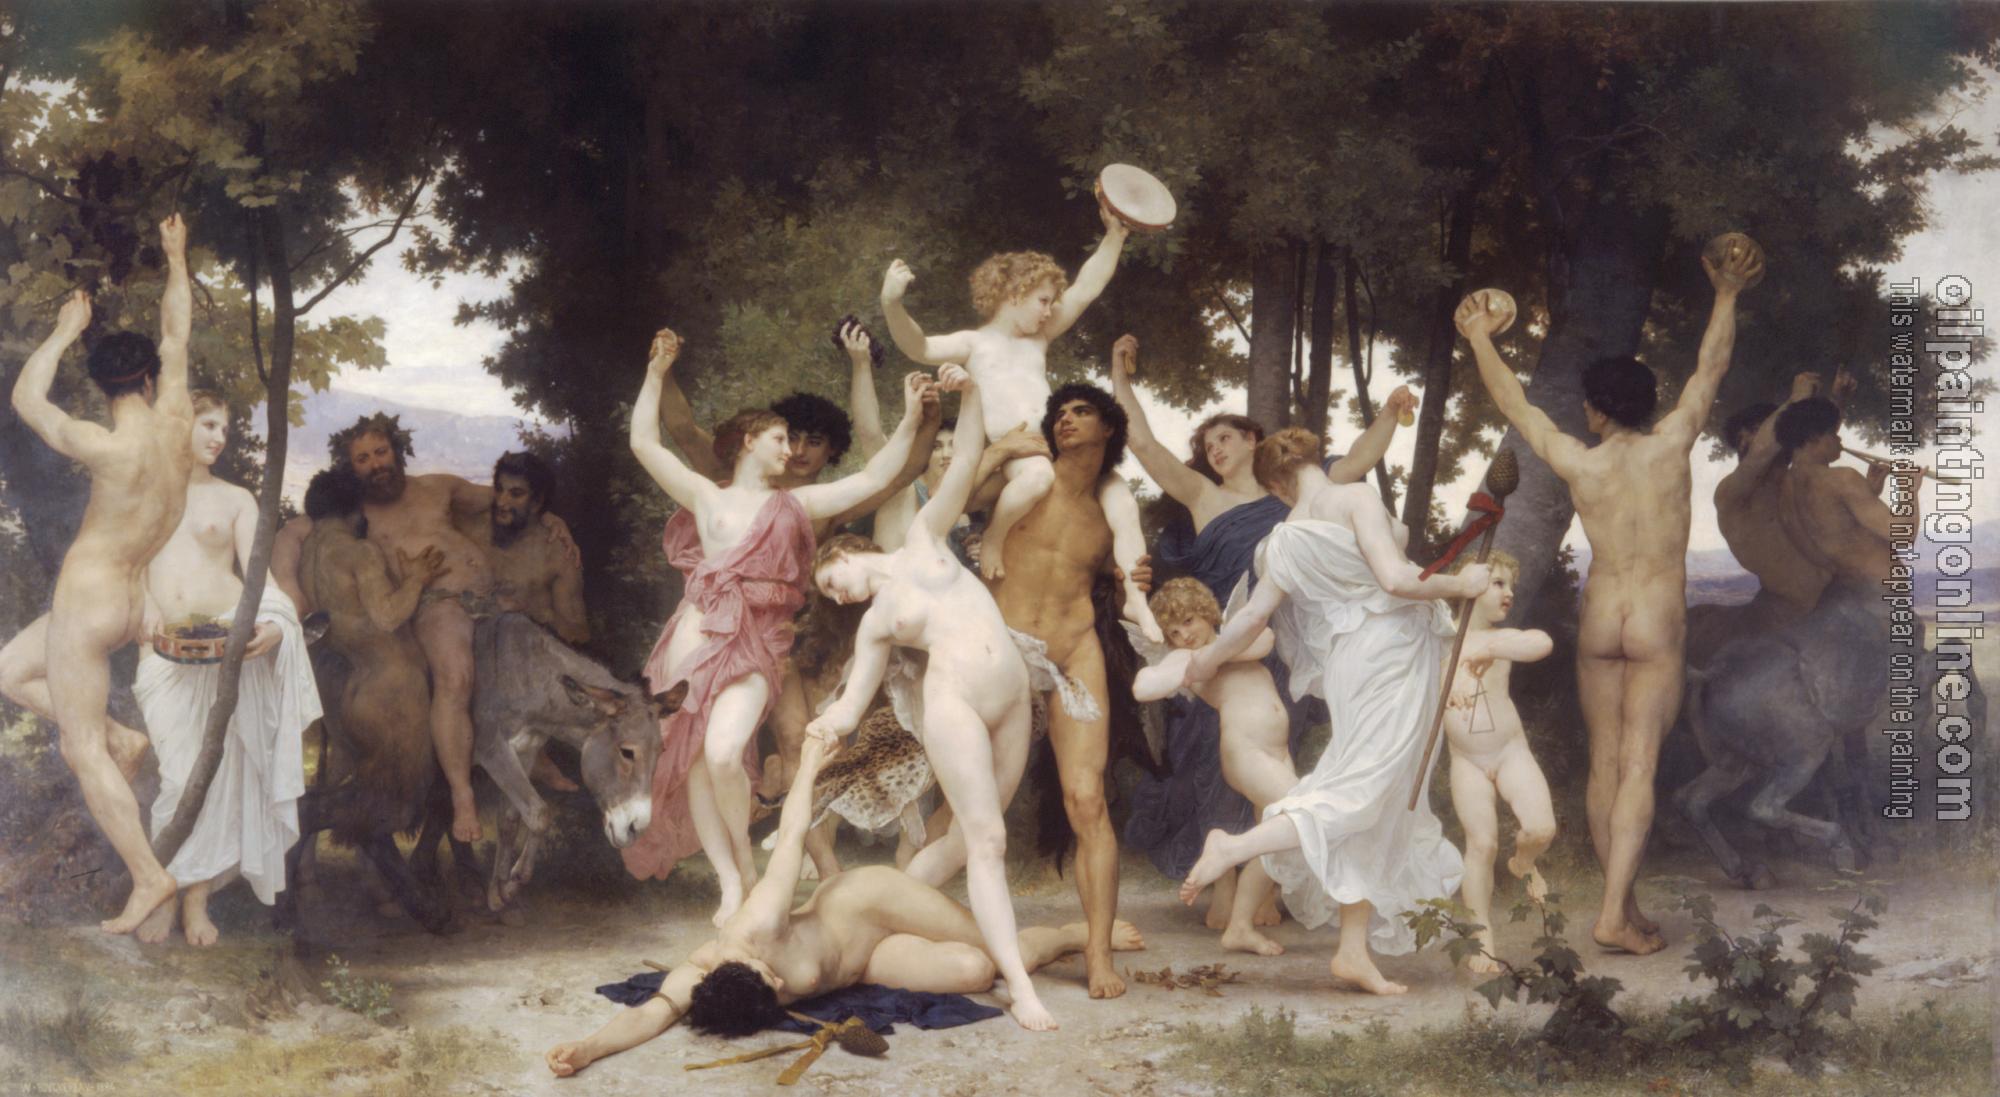 Bouguereau, William-Adolphe - The Youth of Bacchus